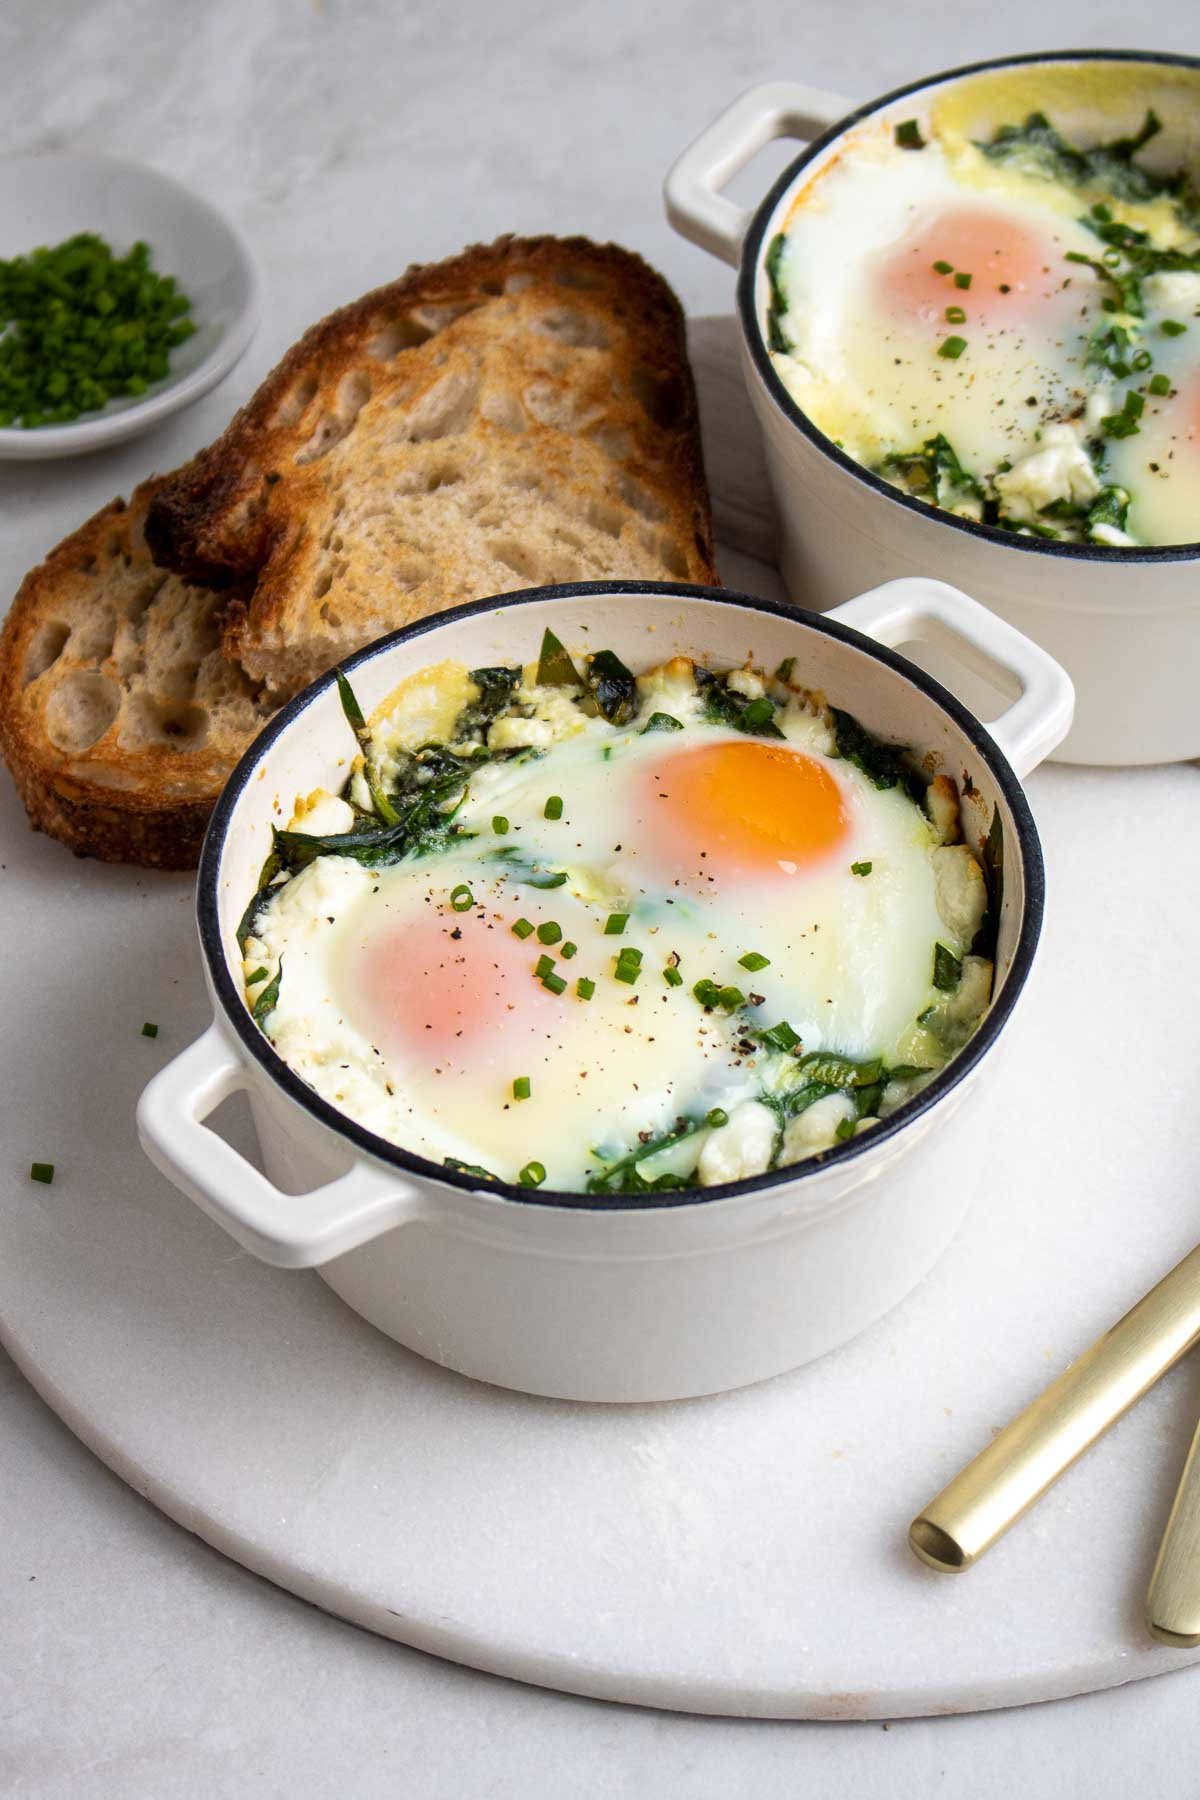 Two ramekins filled with baked eggs with spinach and goat cheese with a side of toast.